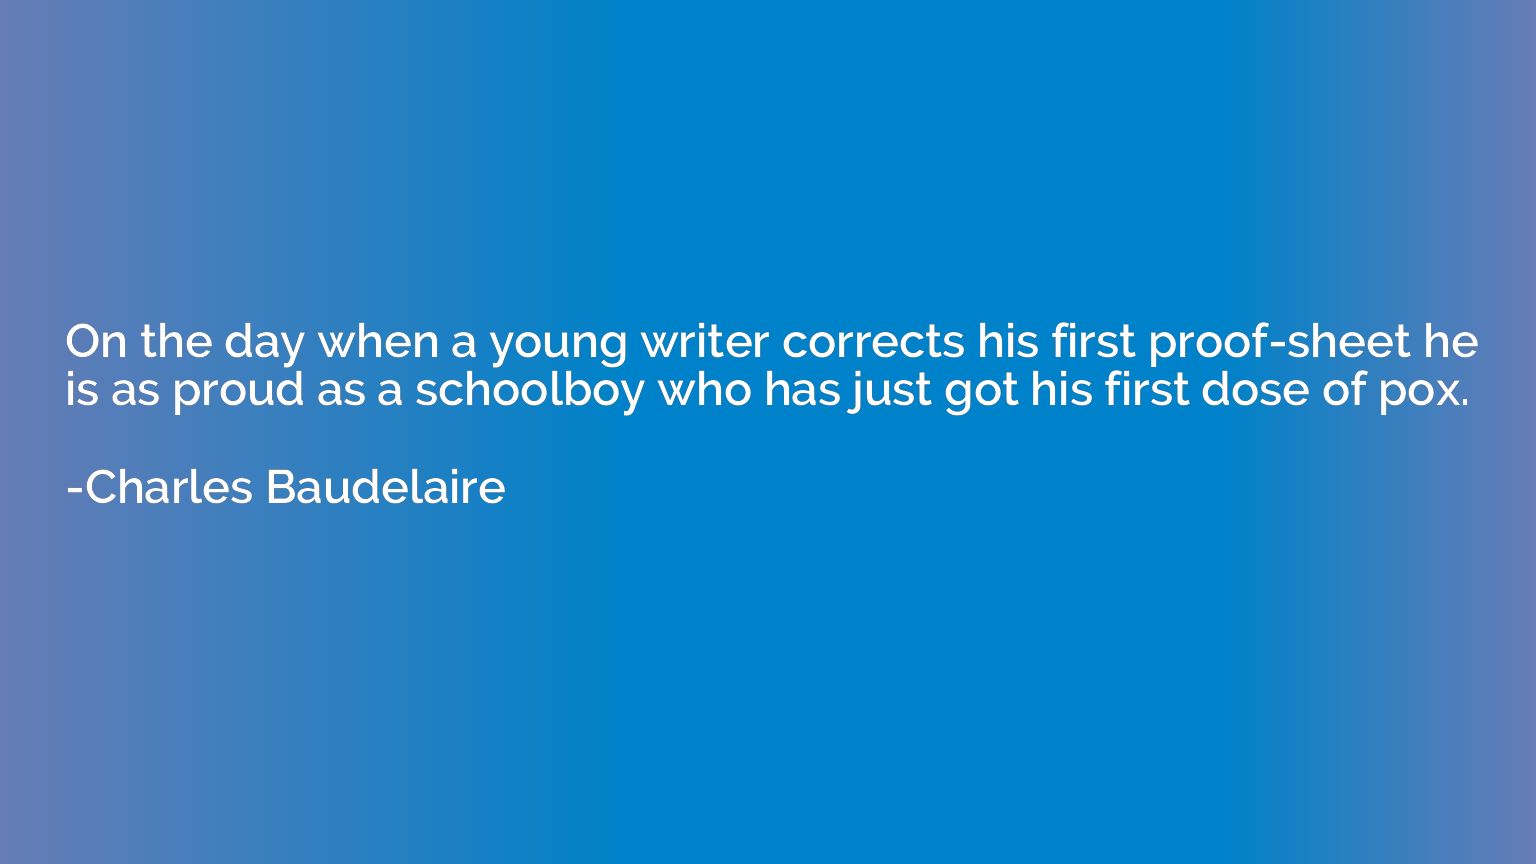 On the day when a young writer corrects his first proof-shee